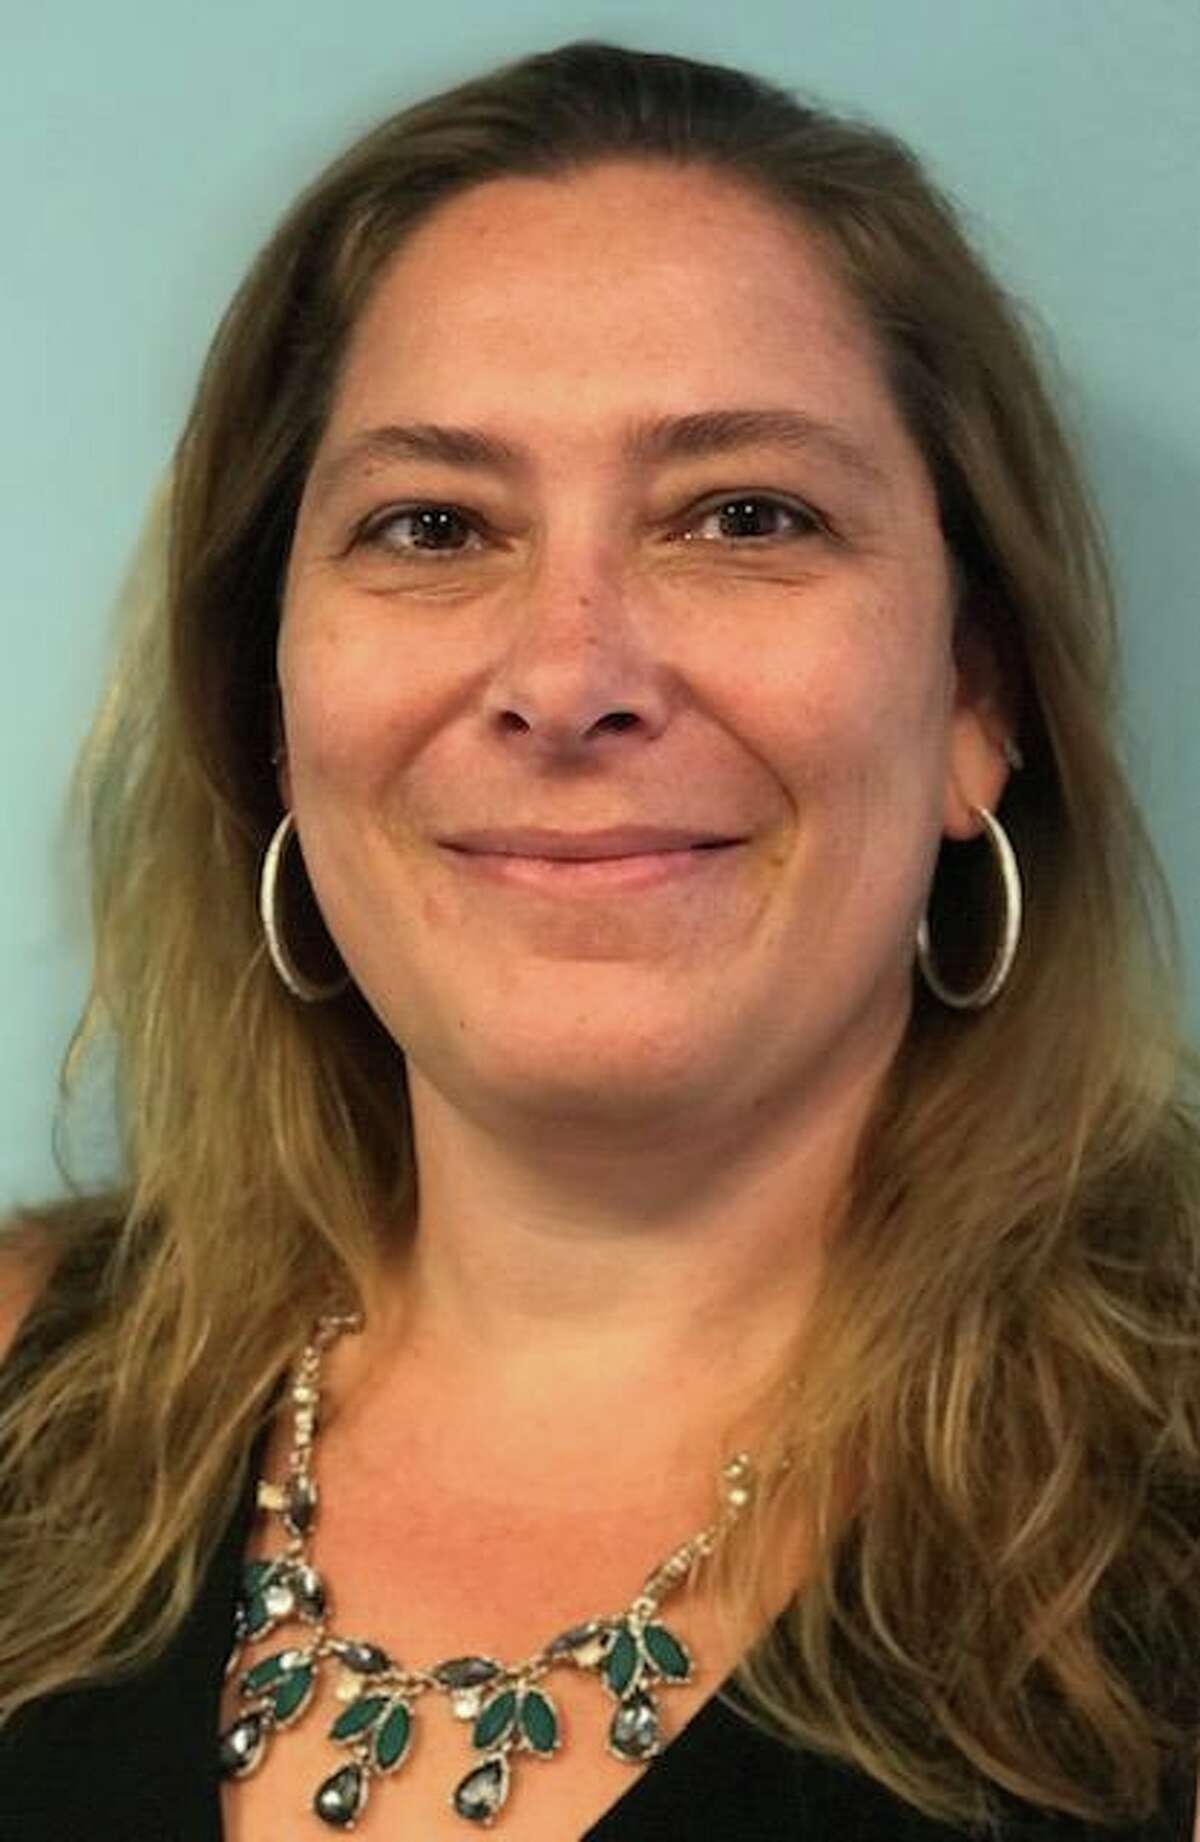 Stacey Heiligenthaler as the Interim Chief Pupil Personnel Services Officer, effective July 1, 2021, for the Greenwich Public Schools.